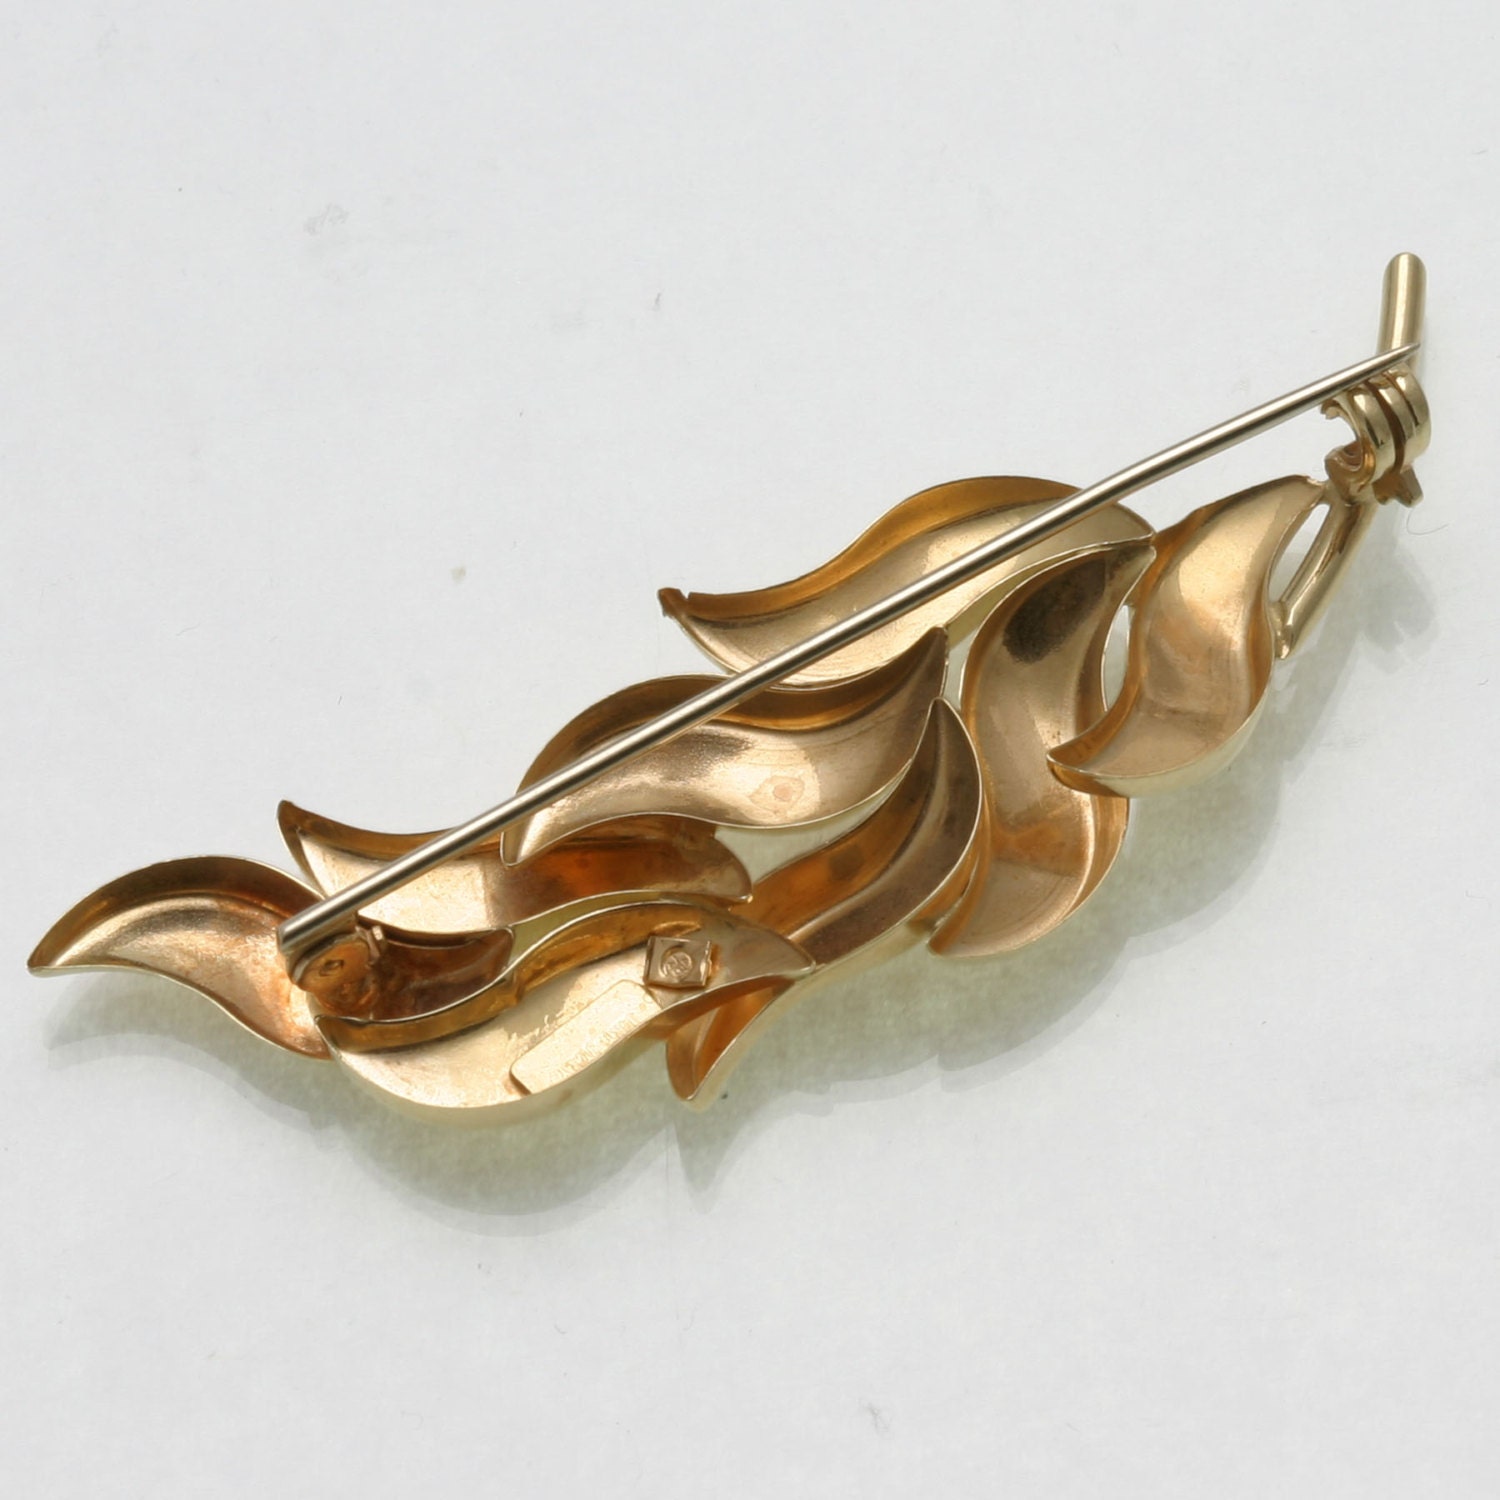 Vintage 14k Yellow Gold Vine Leaf Brooch Pin Made in Italy - Etsy